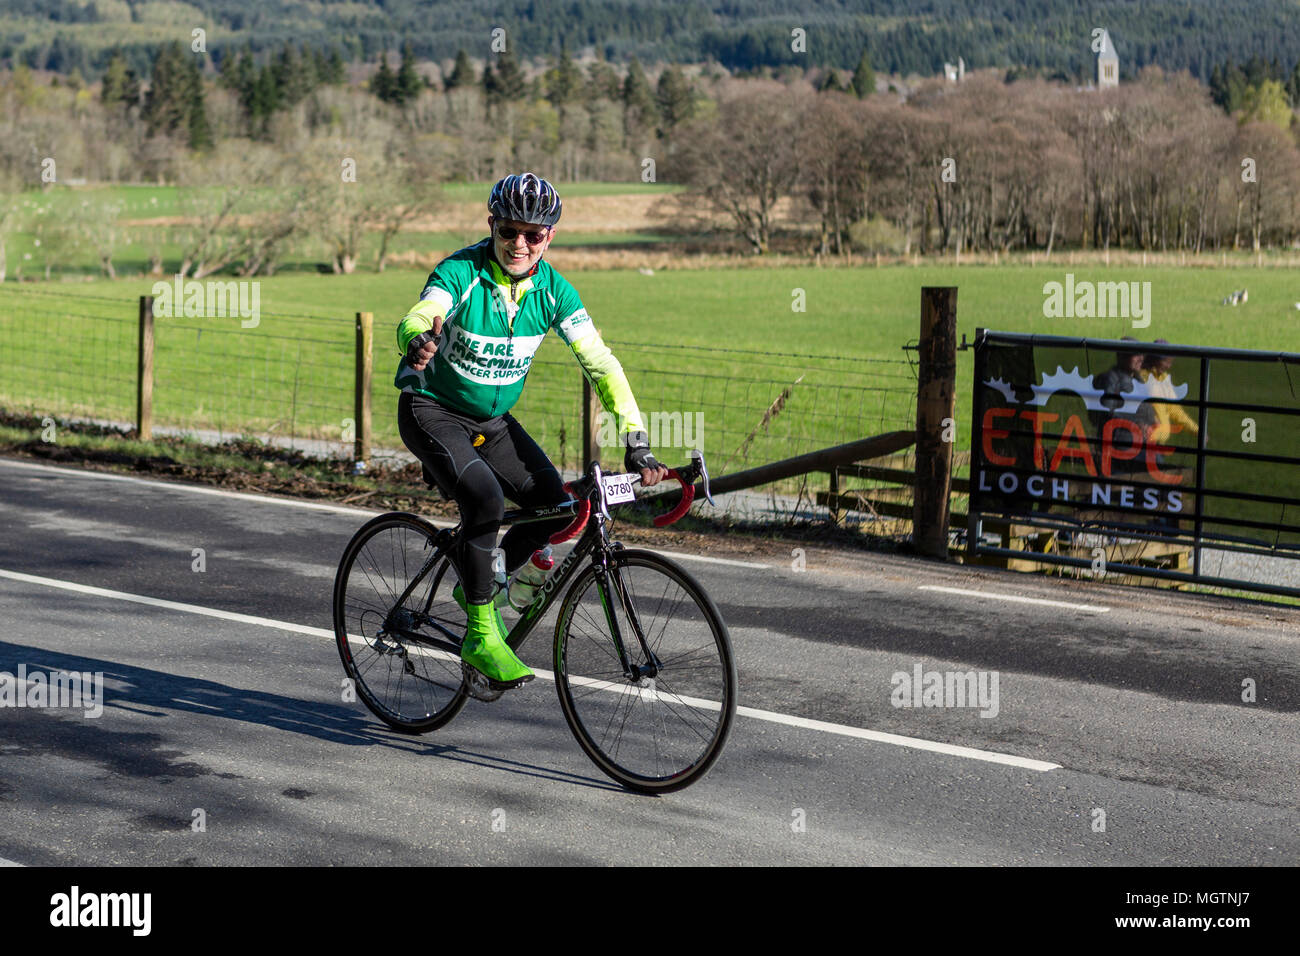 Fort Augustus, Scotland, UK. 29th April, 2018. Cyclists taking part in the Etape Loch Ness closed road cycle sportive following a 360-degree 66-mile / 106-Km route around Loch Ness, Scotland, starting and finishing in Inverness. This event is expected to attract 5,600 cyclists from across Scotland and the UK. Thousands of pounds will be raised by participants for Macmillan Cancer Support, the official event charity. This image shows a participant riding for Macmillan Cancer Support reaching the half way point near Fort Augustus. Cliff Green/Alamy Live News Stock Photo